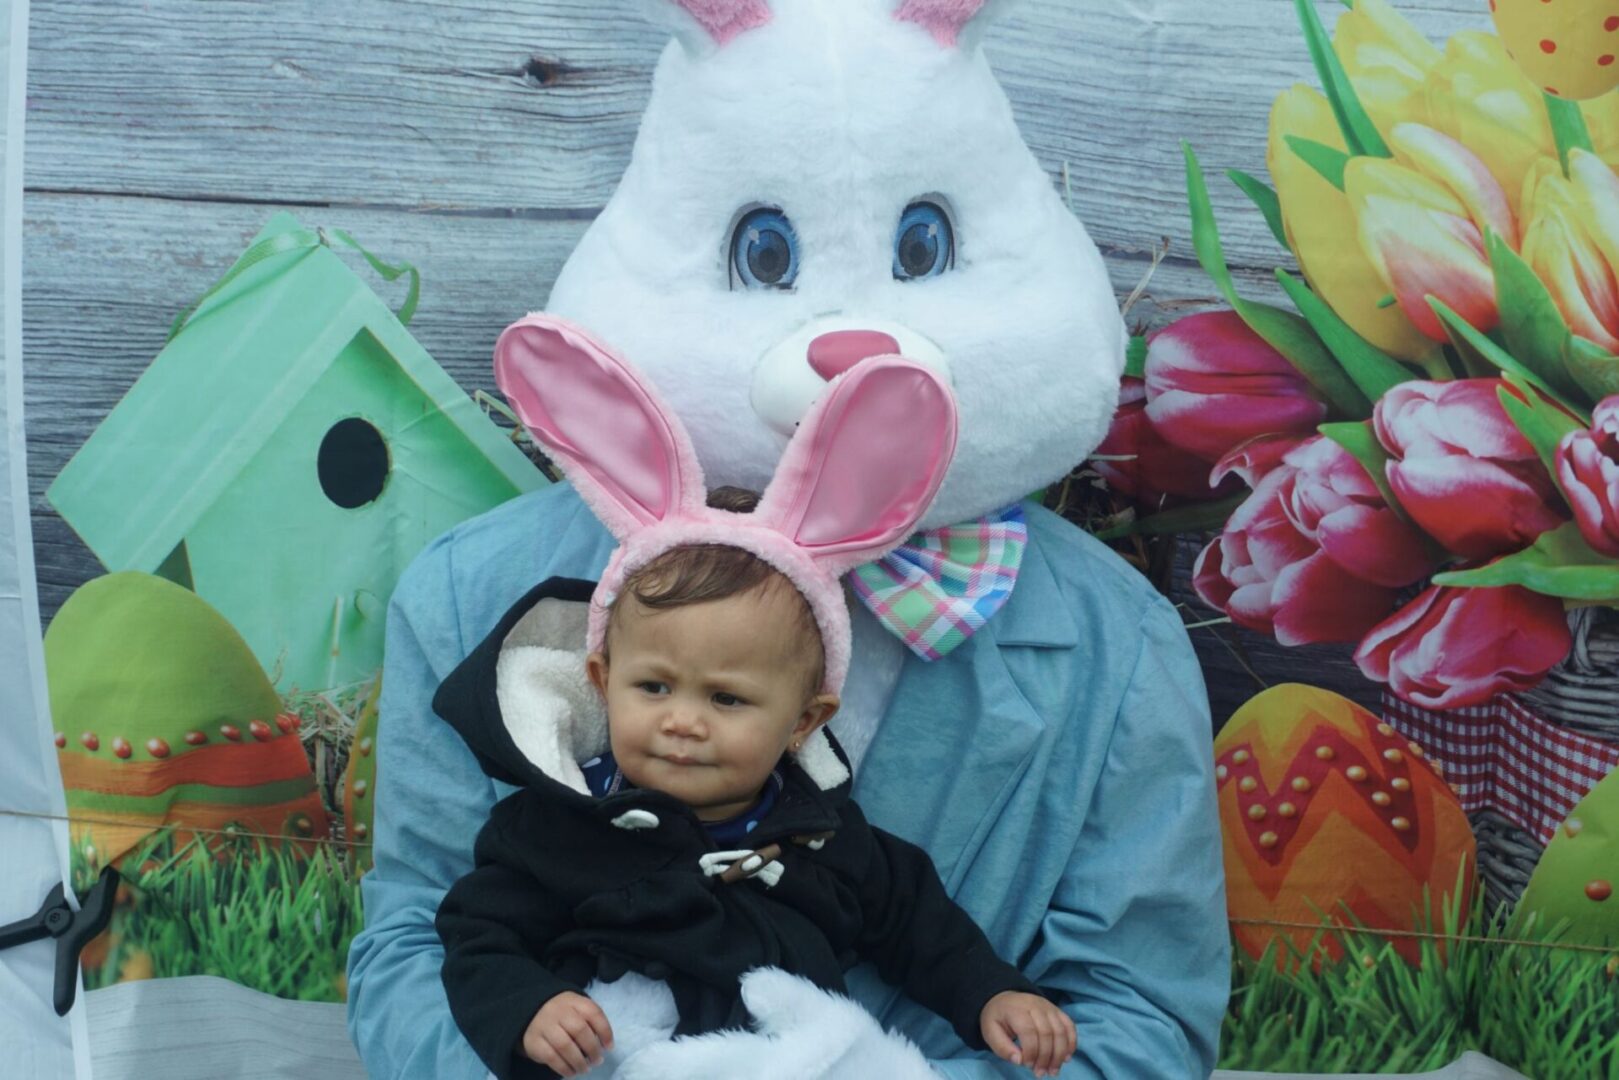 The bunny mascot carrying a baby with bunny ears